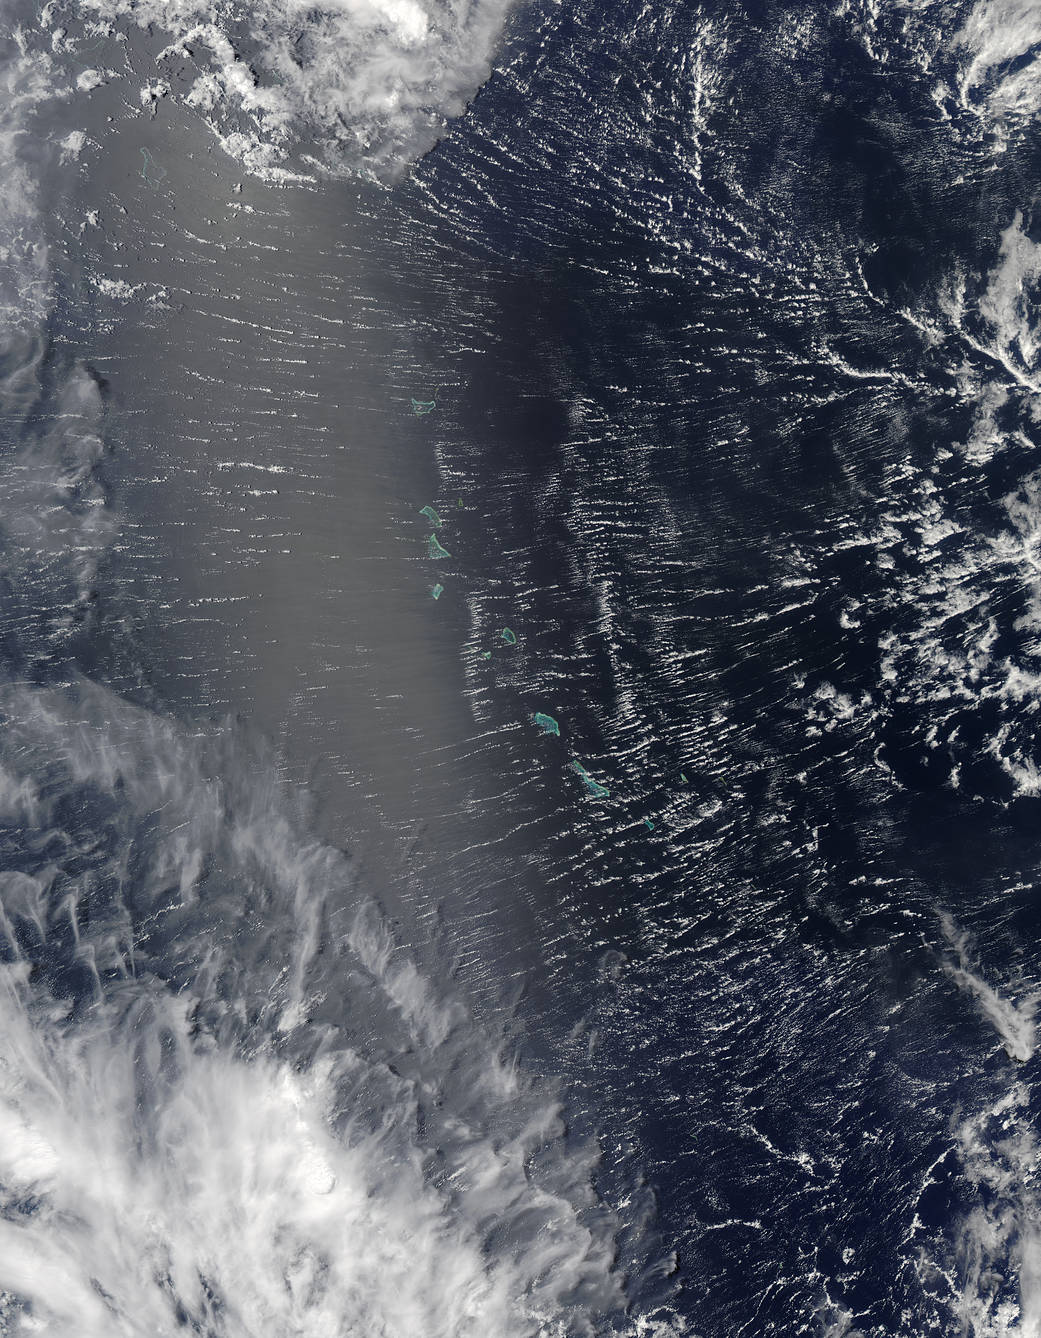 Satellite view of clouds and sunglint over islands in the Pacific Ocean